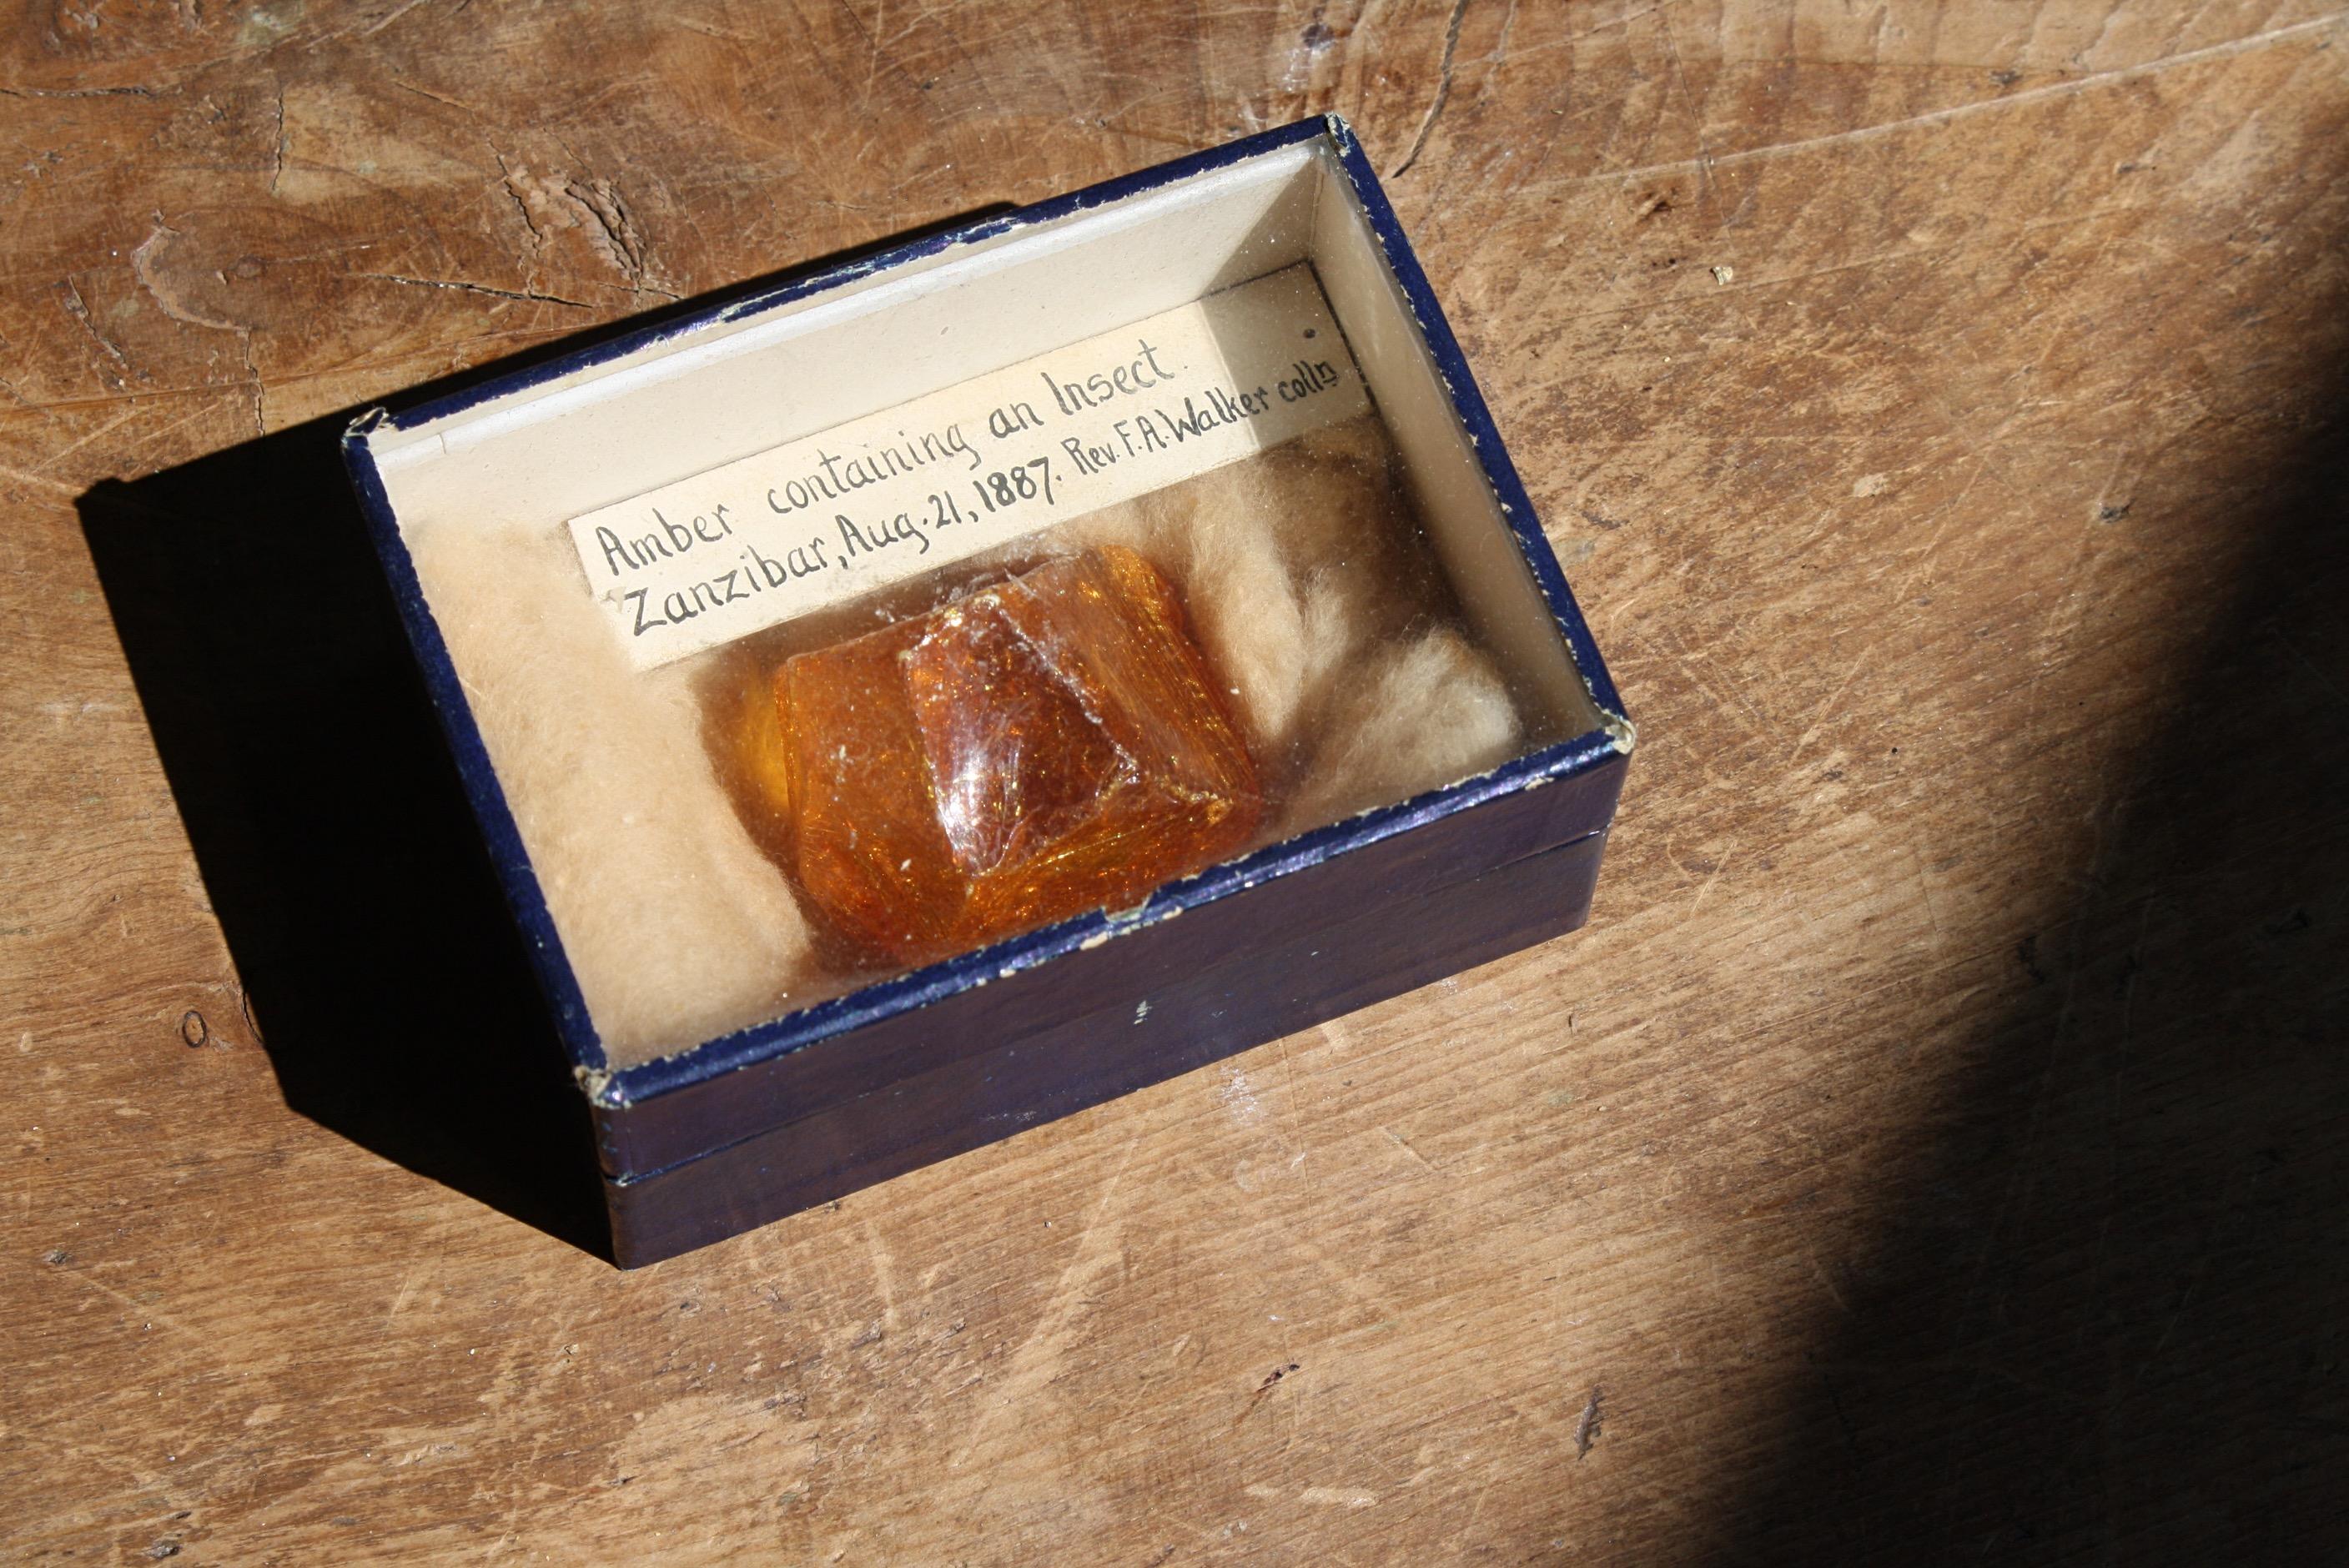 A victorian amber specimen, with a small inset captured within. Housed in it original cardboard and glazed display case, with a label reading 